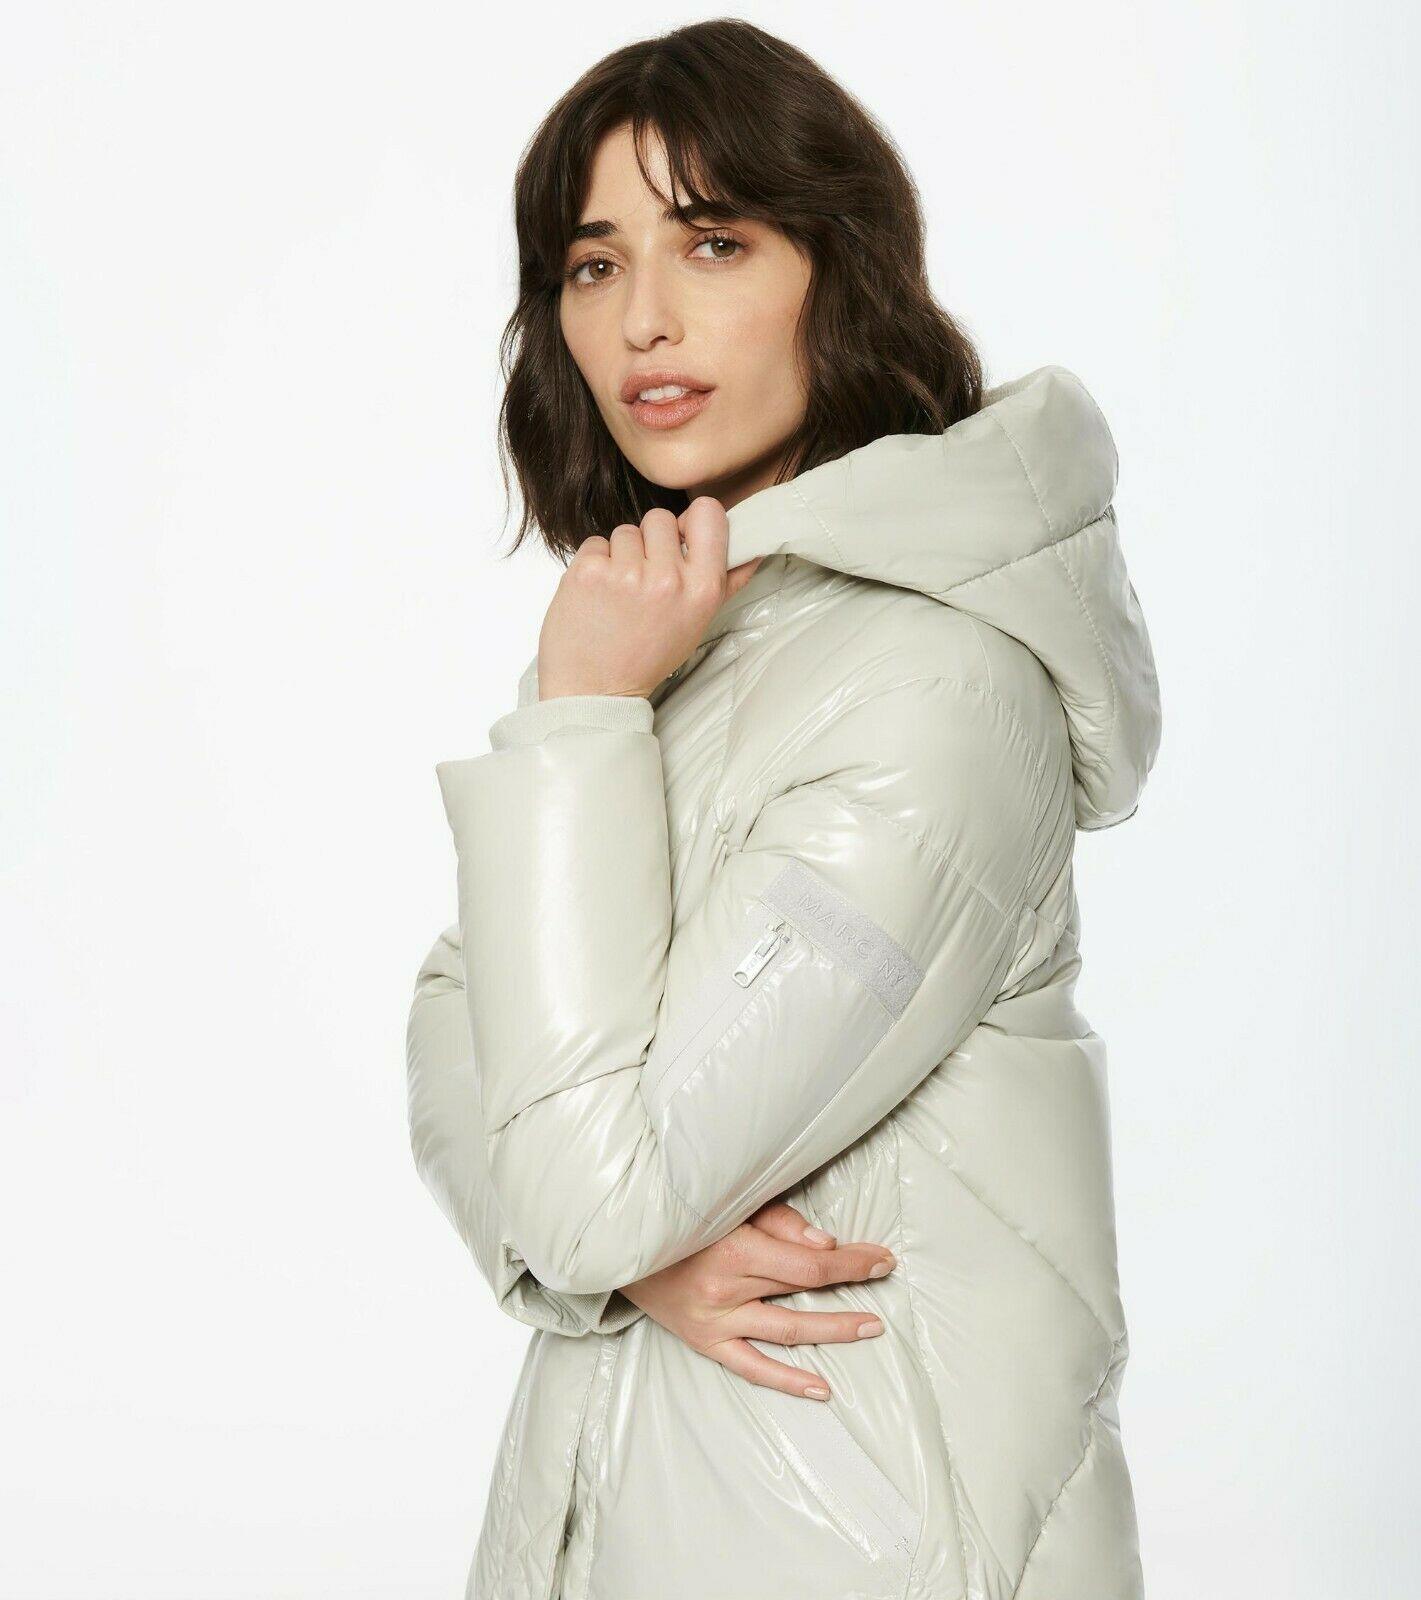 Andrew Marc New York Water Resistant Down Puffer Coat Light Gray Size S - SVNYFancy